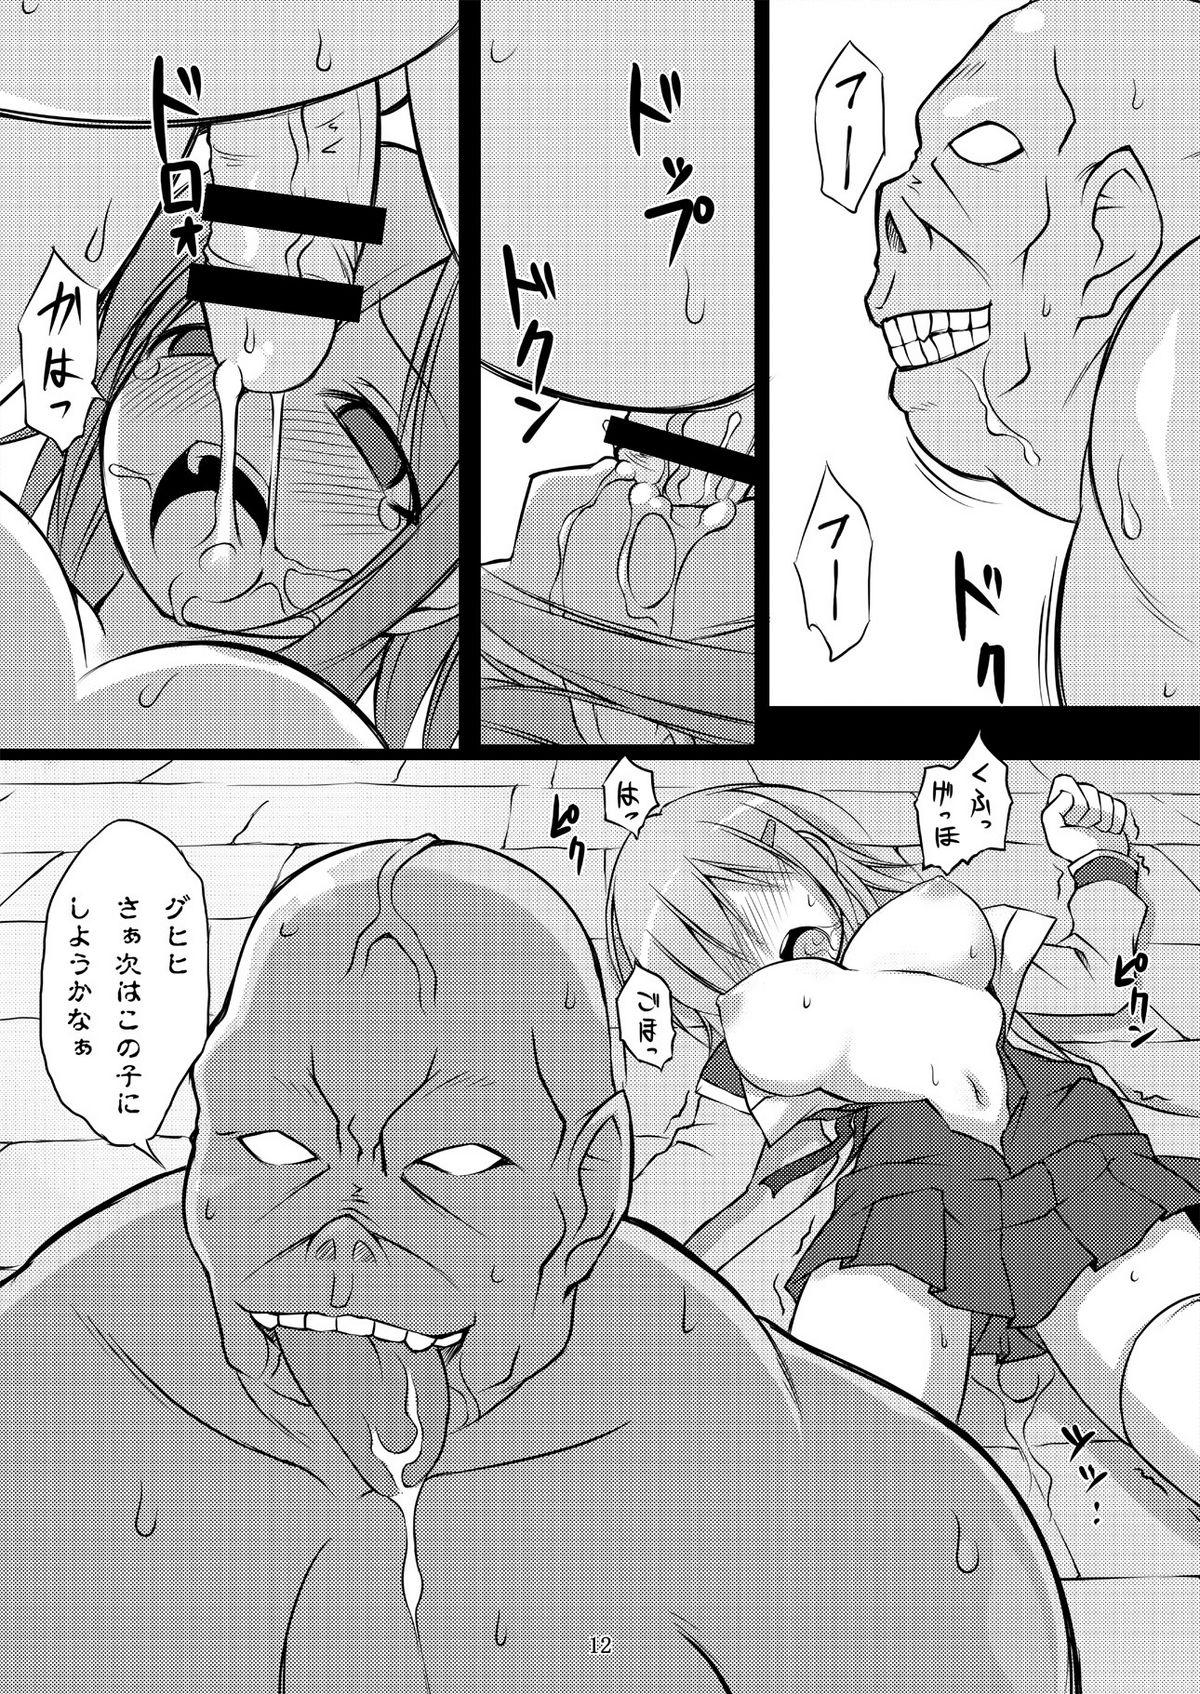 Hair 魔法戦士触獄に堕つ～獄卒の洗礼～ Massages - Page 12